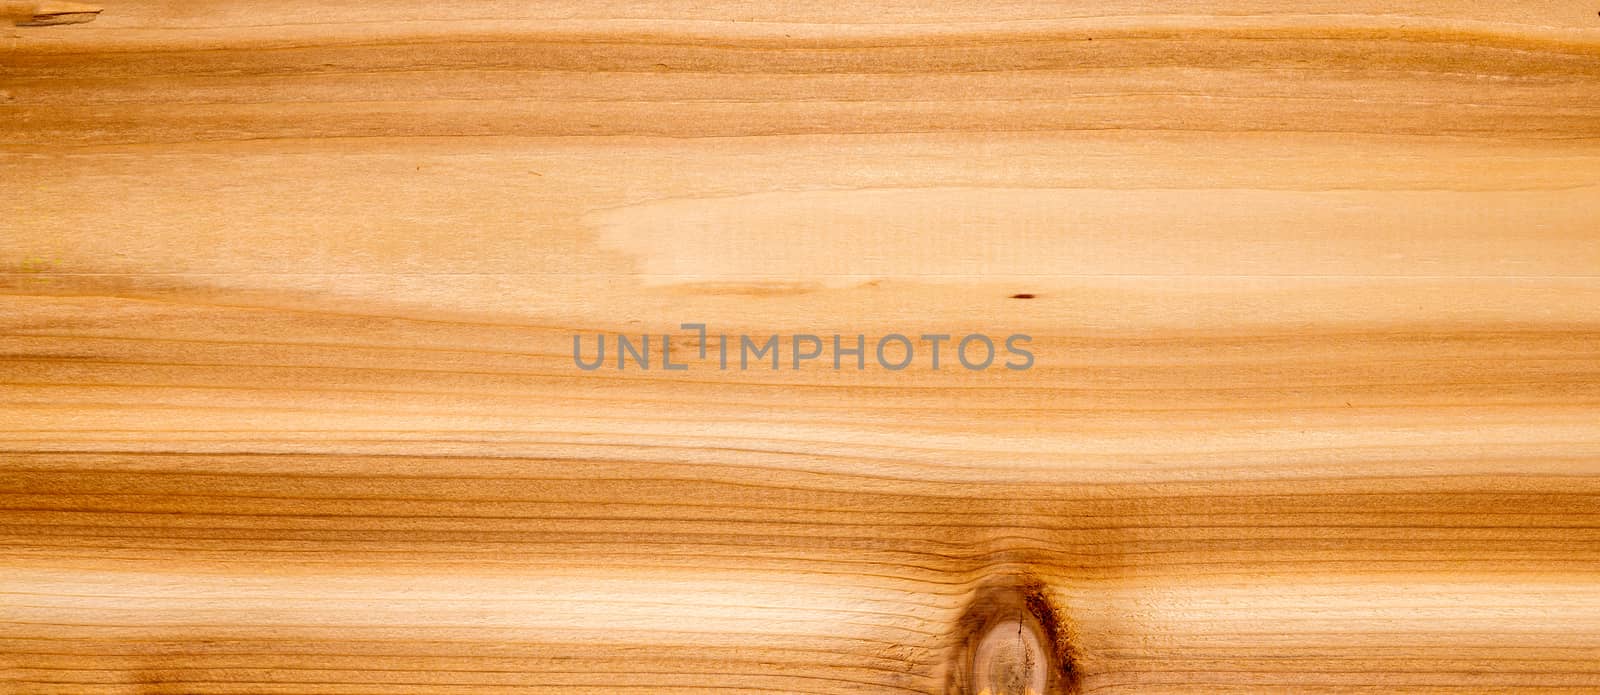 Cedar plank background or texture tile with room for copy space.